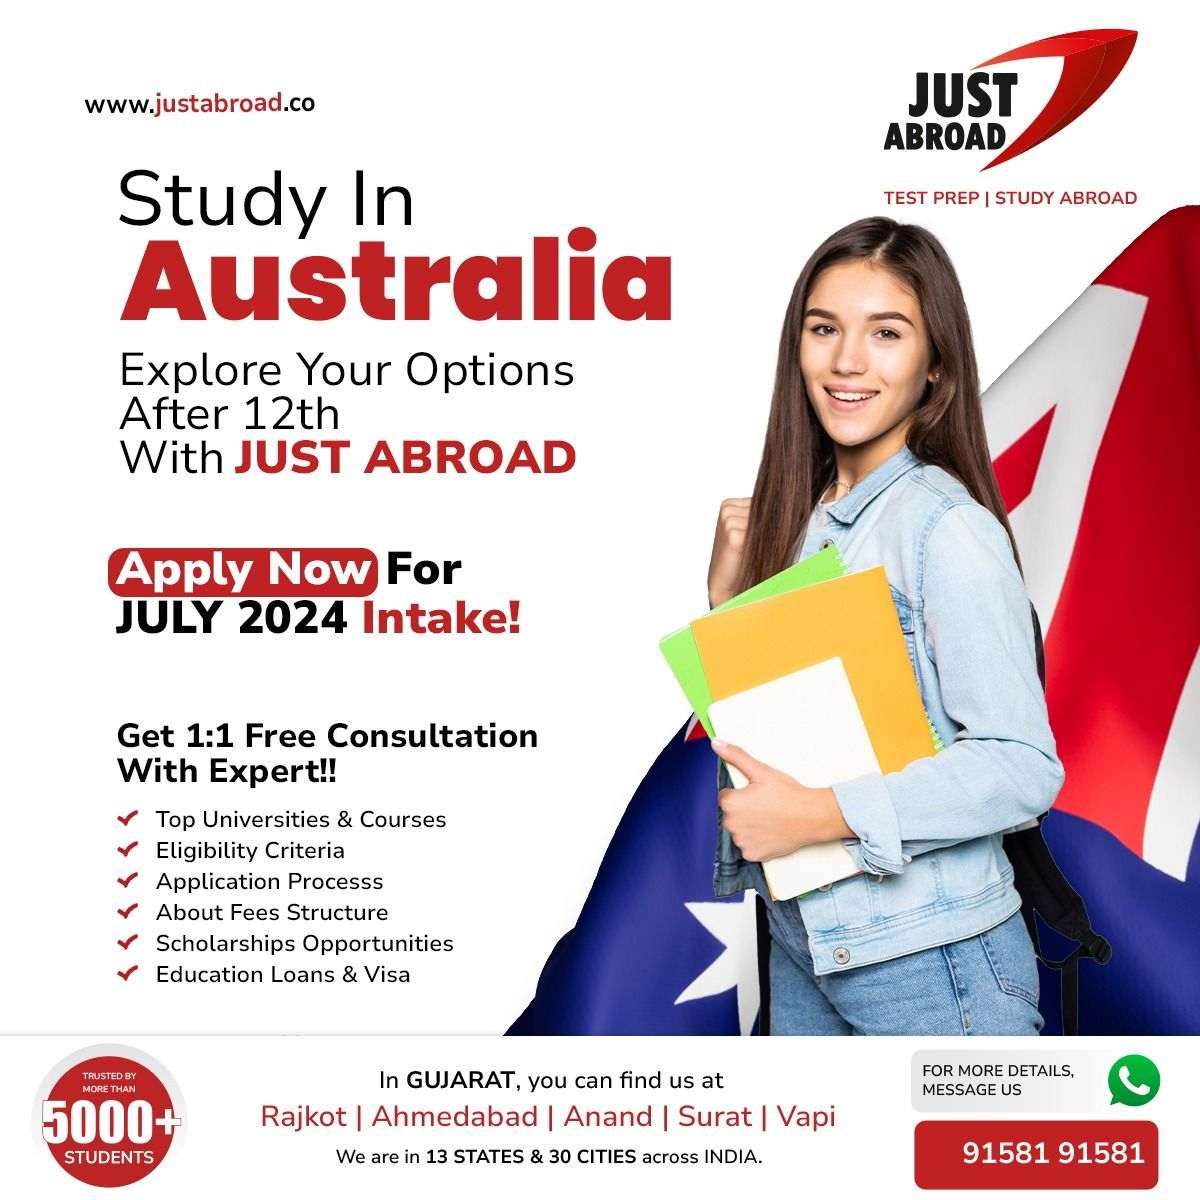 🎓🇦🇺 Ready to explore your options after 12th? Study in Australia with Just Abroad! 🌏✈️ 

#JustAbroad #StudyInAustralia #After12th #FutureLeaders #DreamBig #YourPathToSuccess #EducationalAdventure #ExploreTheWorld #StudyAbroadGoals #AustraliaExperience 📚🐨